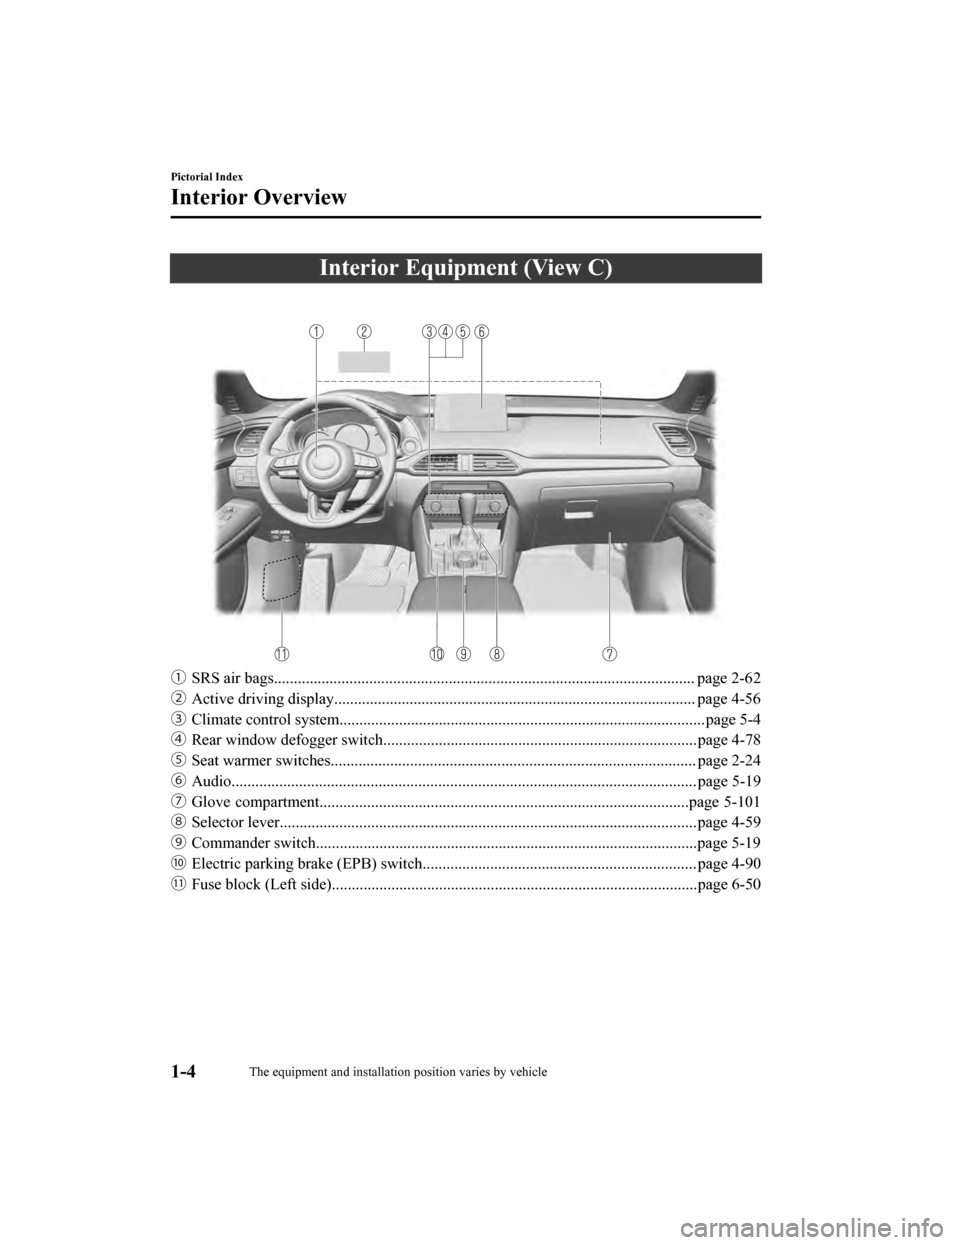 MAZDA MODEL CX-9 2019  Owners Manual (in English) Interior Equipment (View C)
ƒSRS air bags.......................................................................................................... page 2-6 2
„ Active driving display............